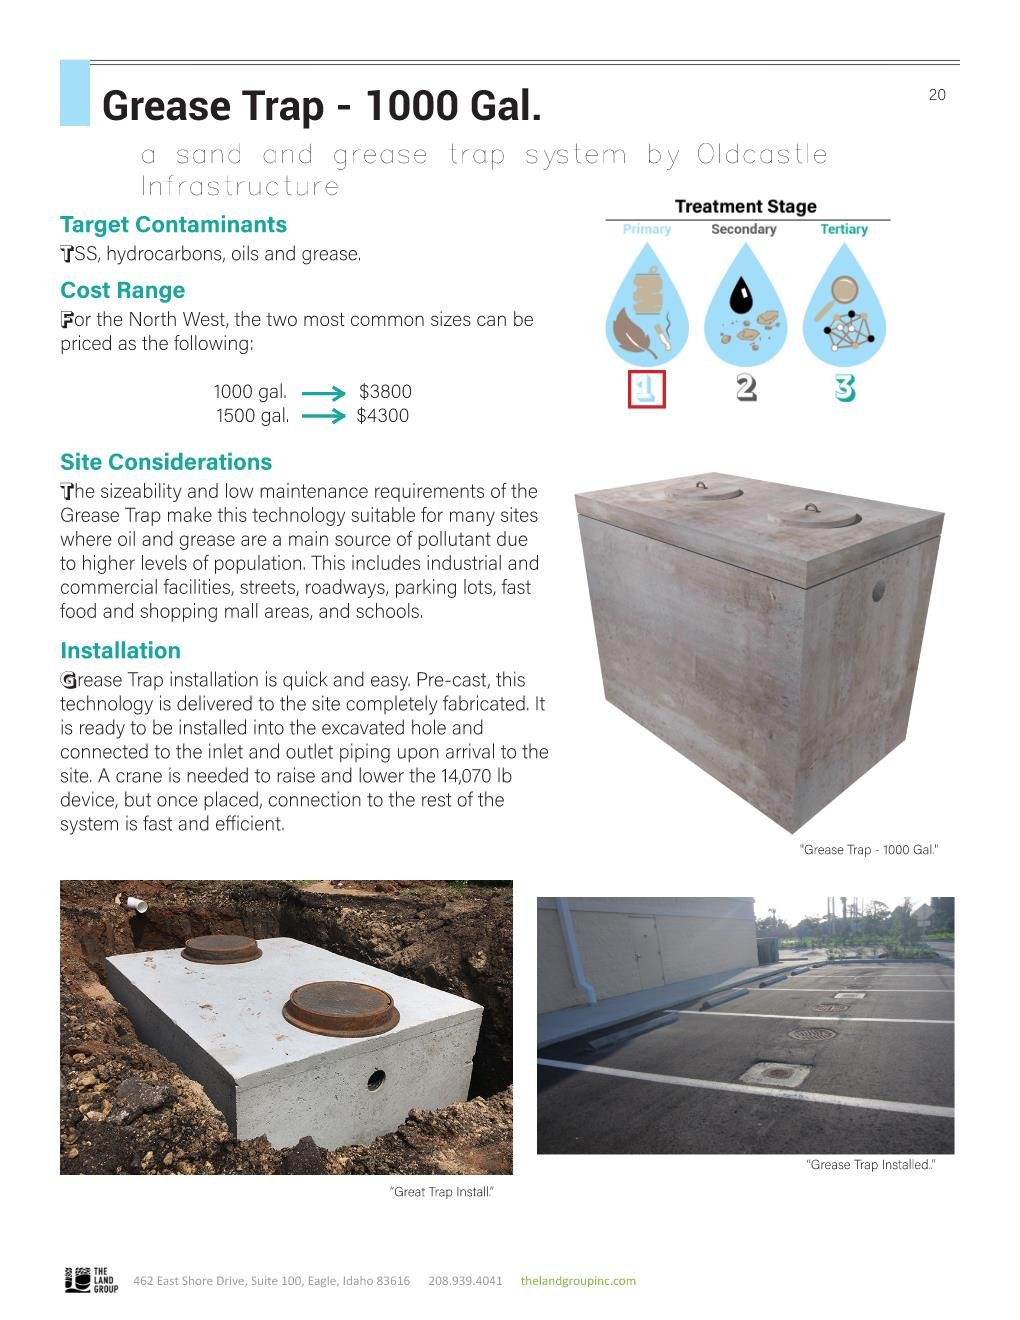 Stormwater Management Technology Comparison Toolkit Page 020.jpg